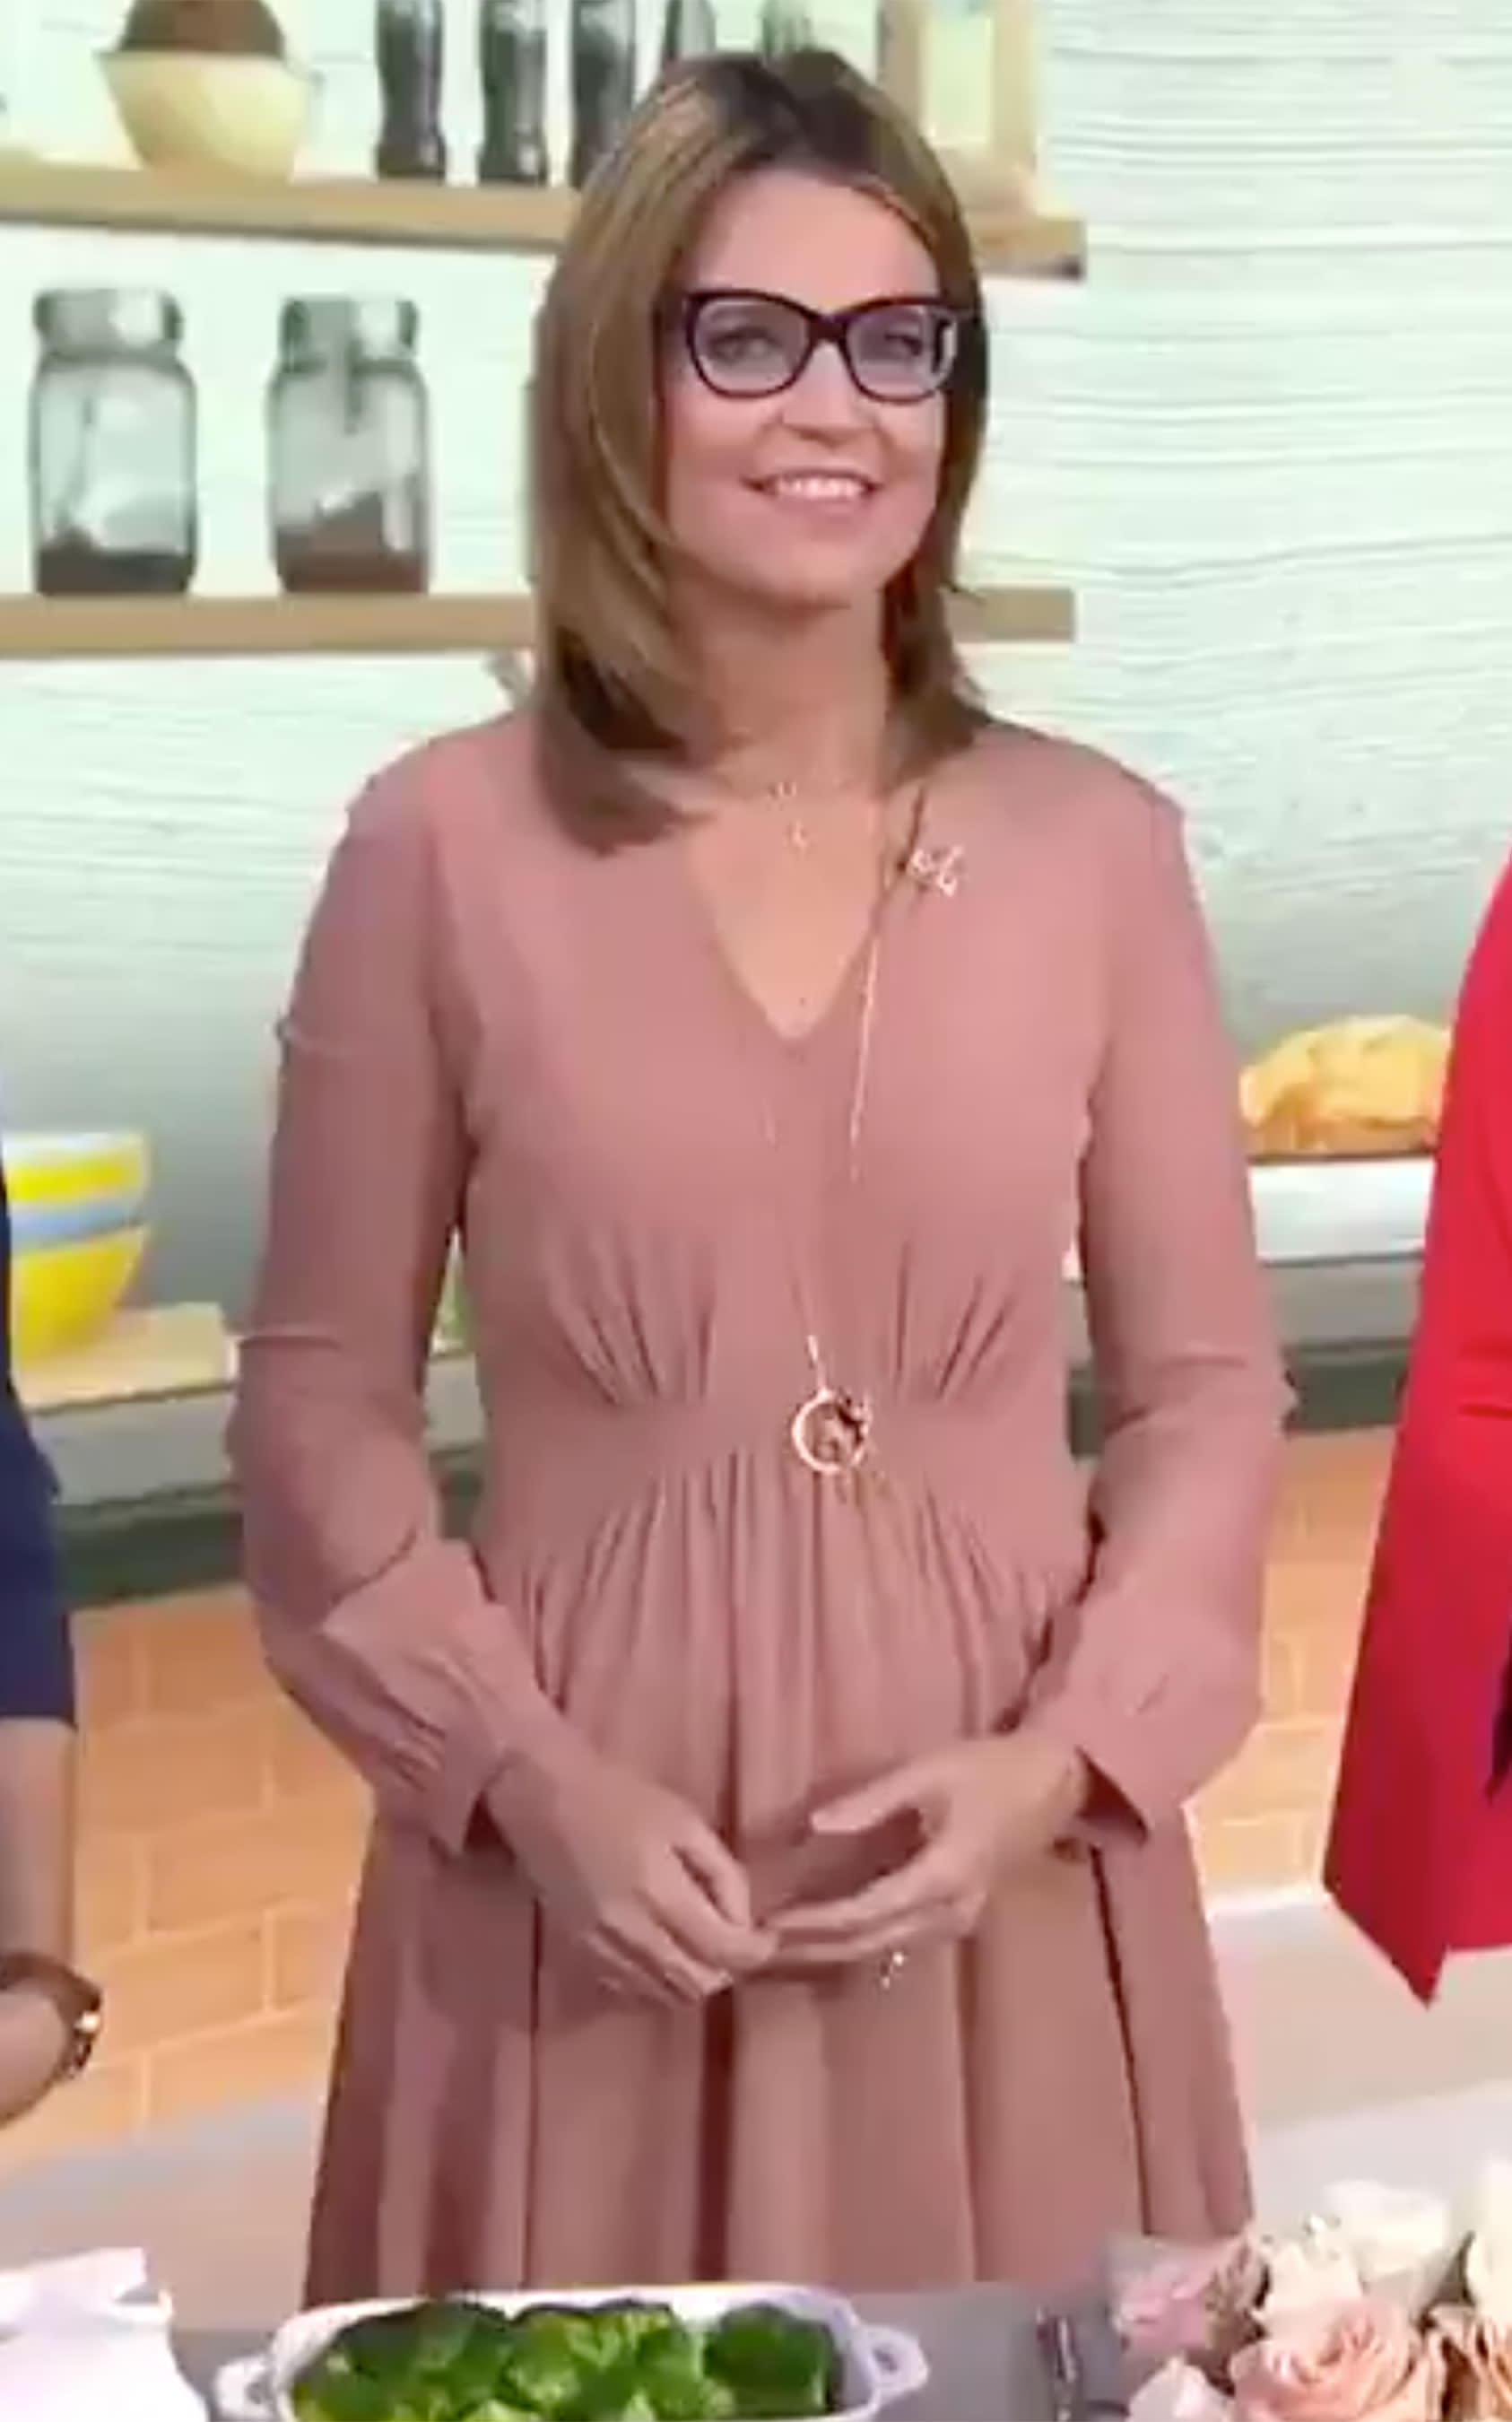 Savannah Guthrie Claps Back at Today Show Viewer Who Blamed Producers